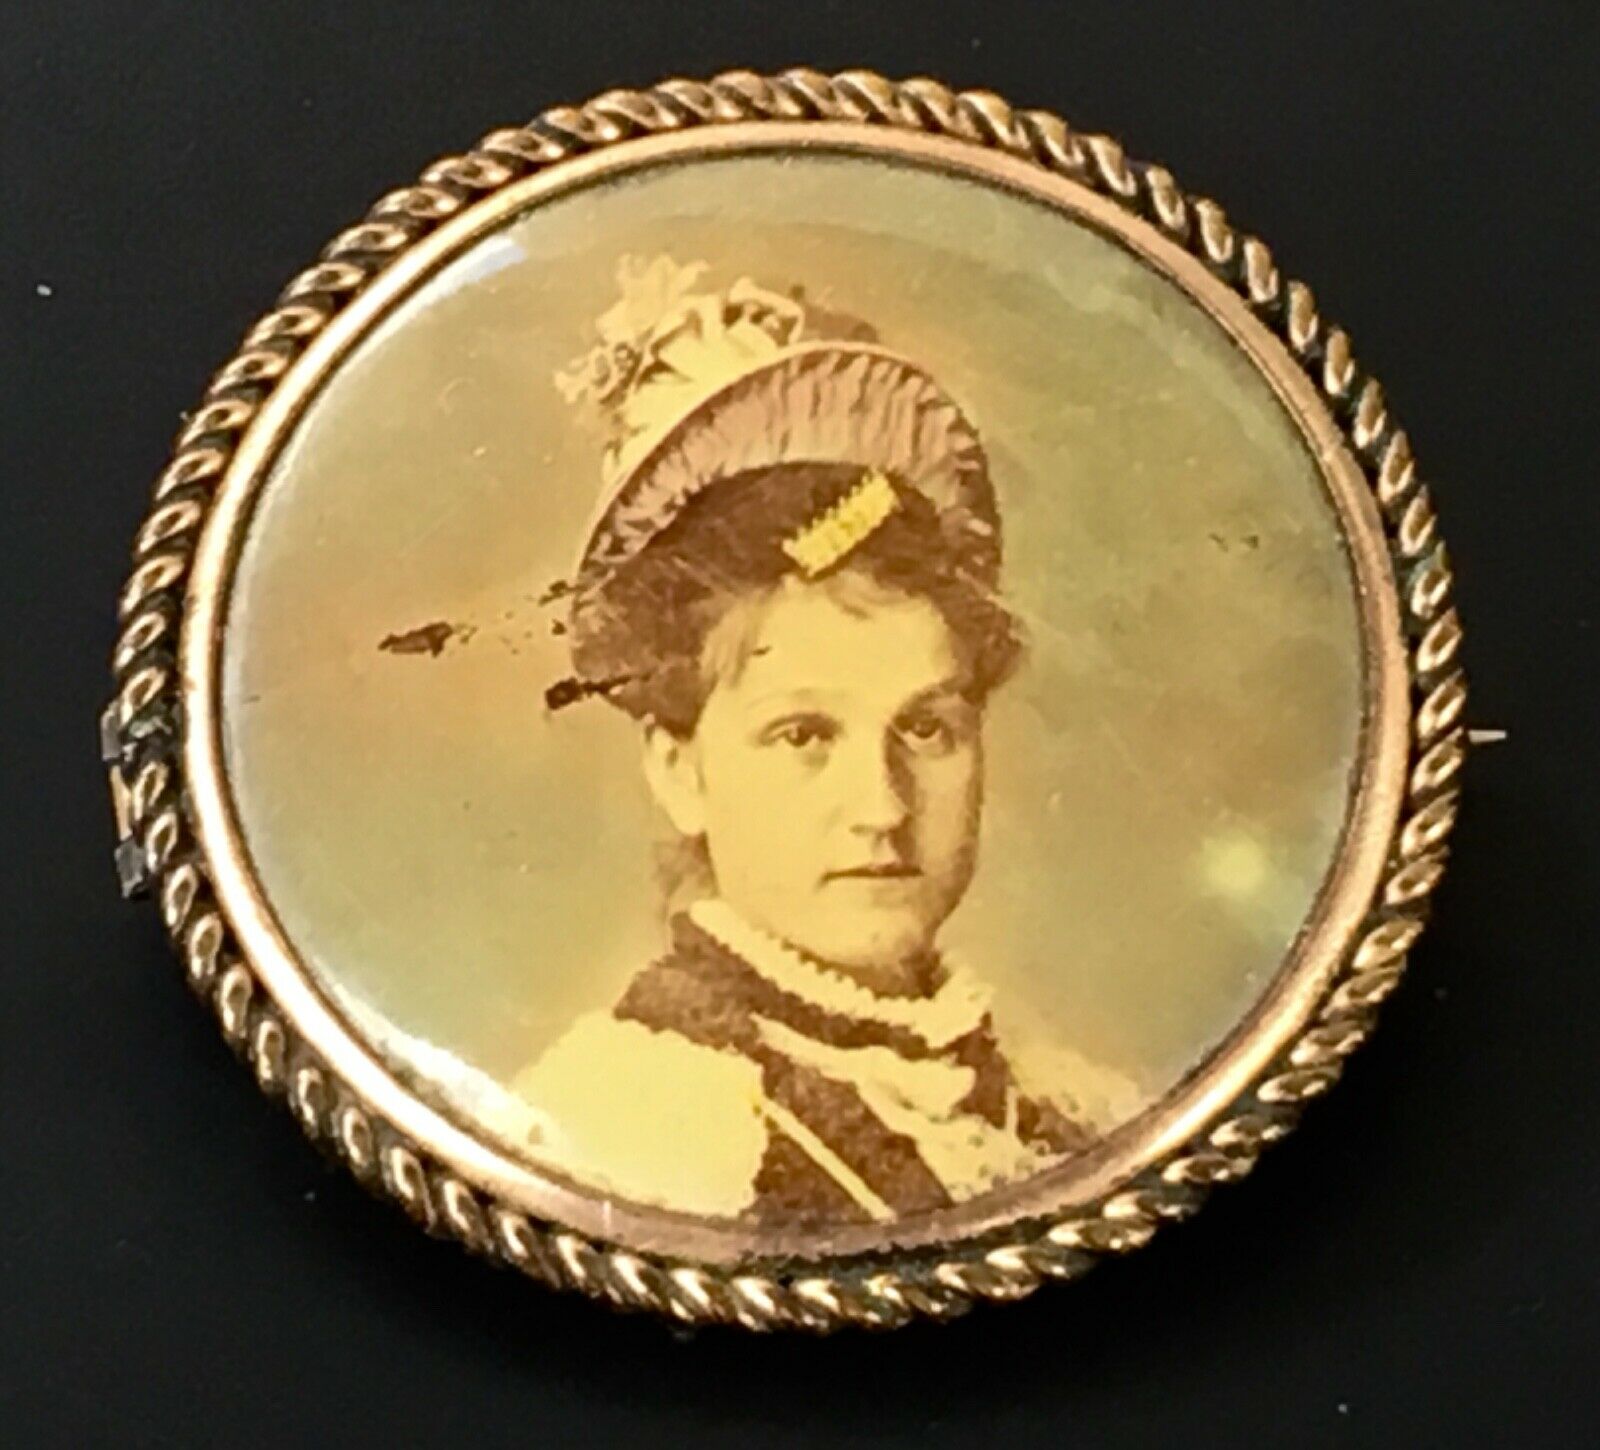 Dressy Antique Victorian Photo Pin Jewelry Vg Condition